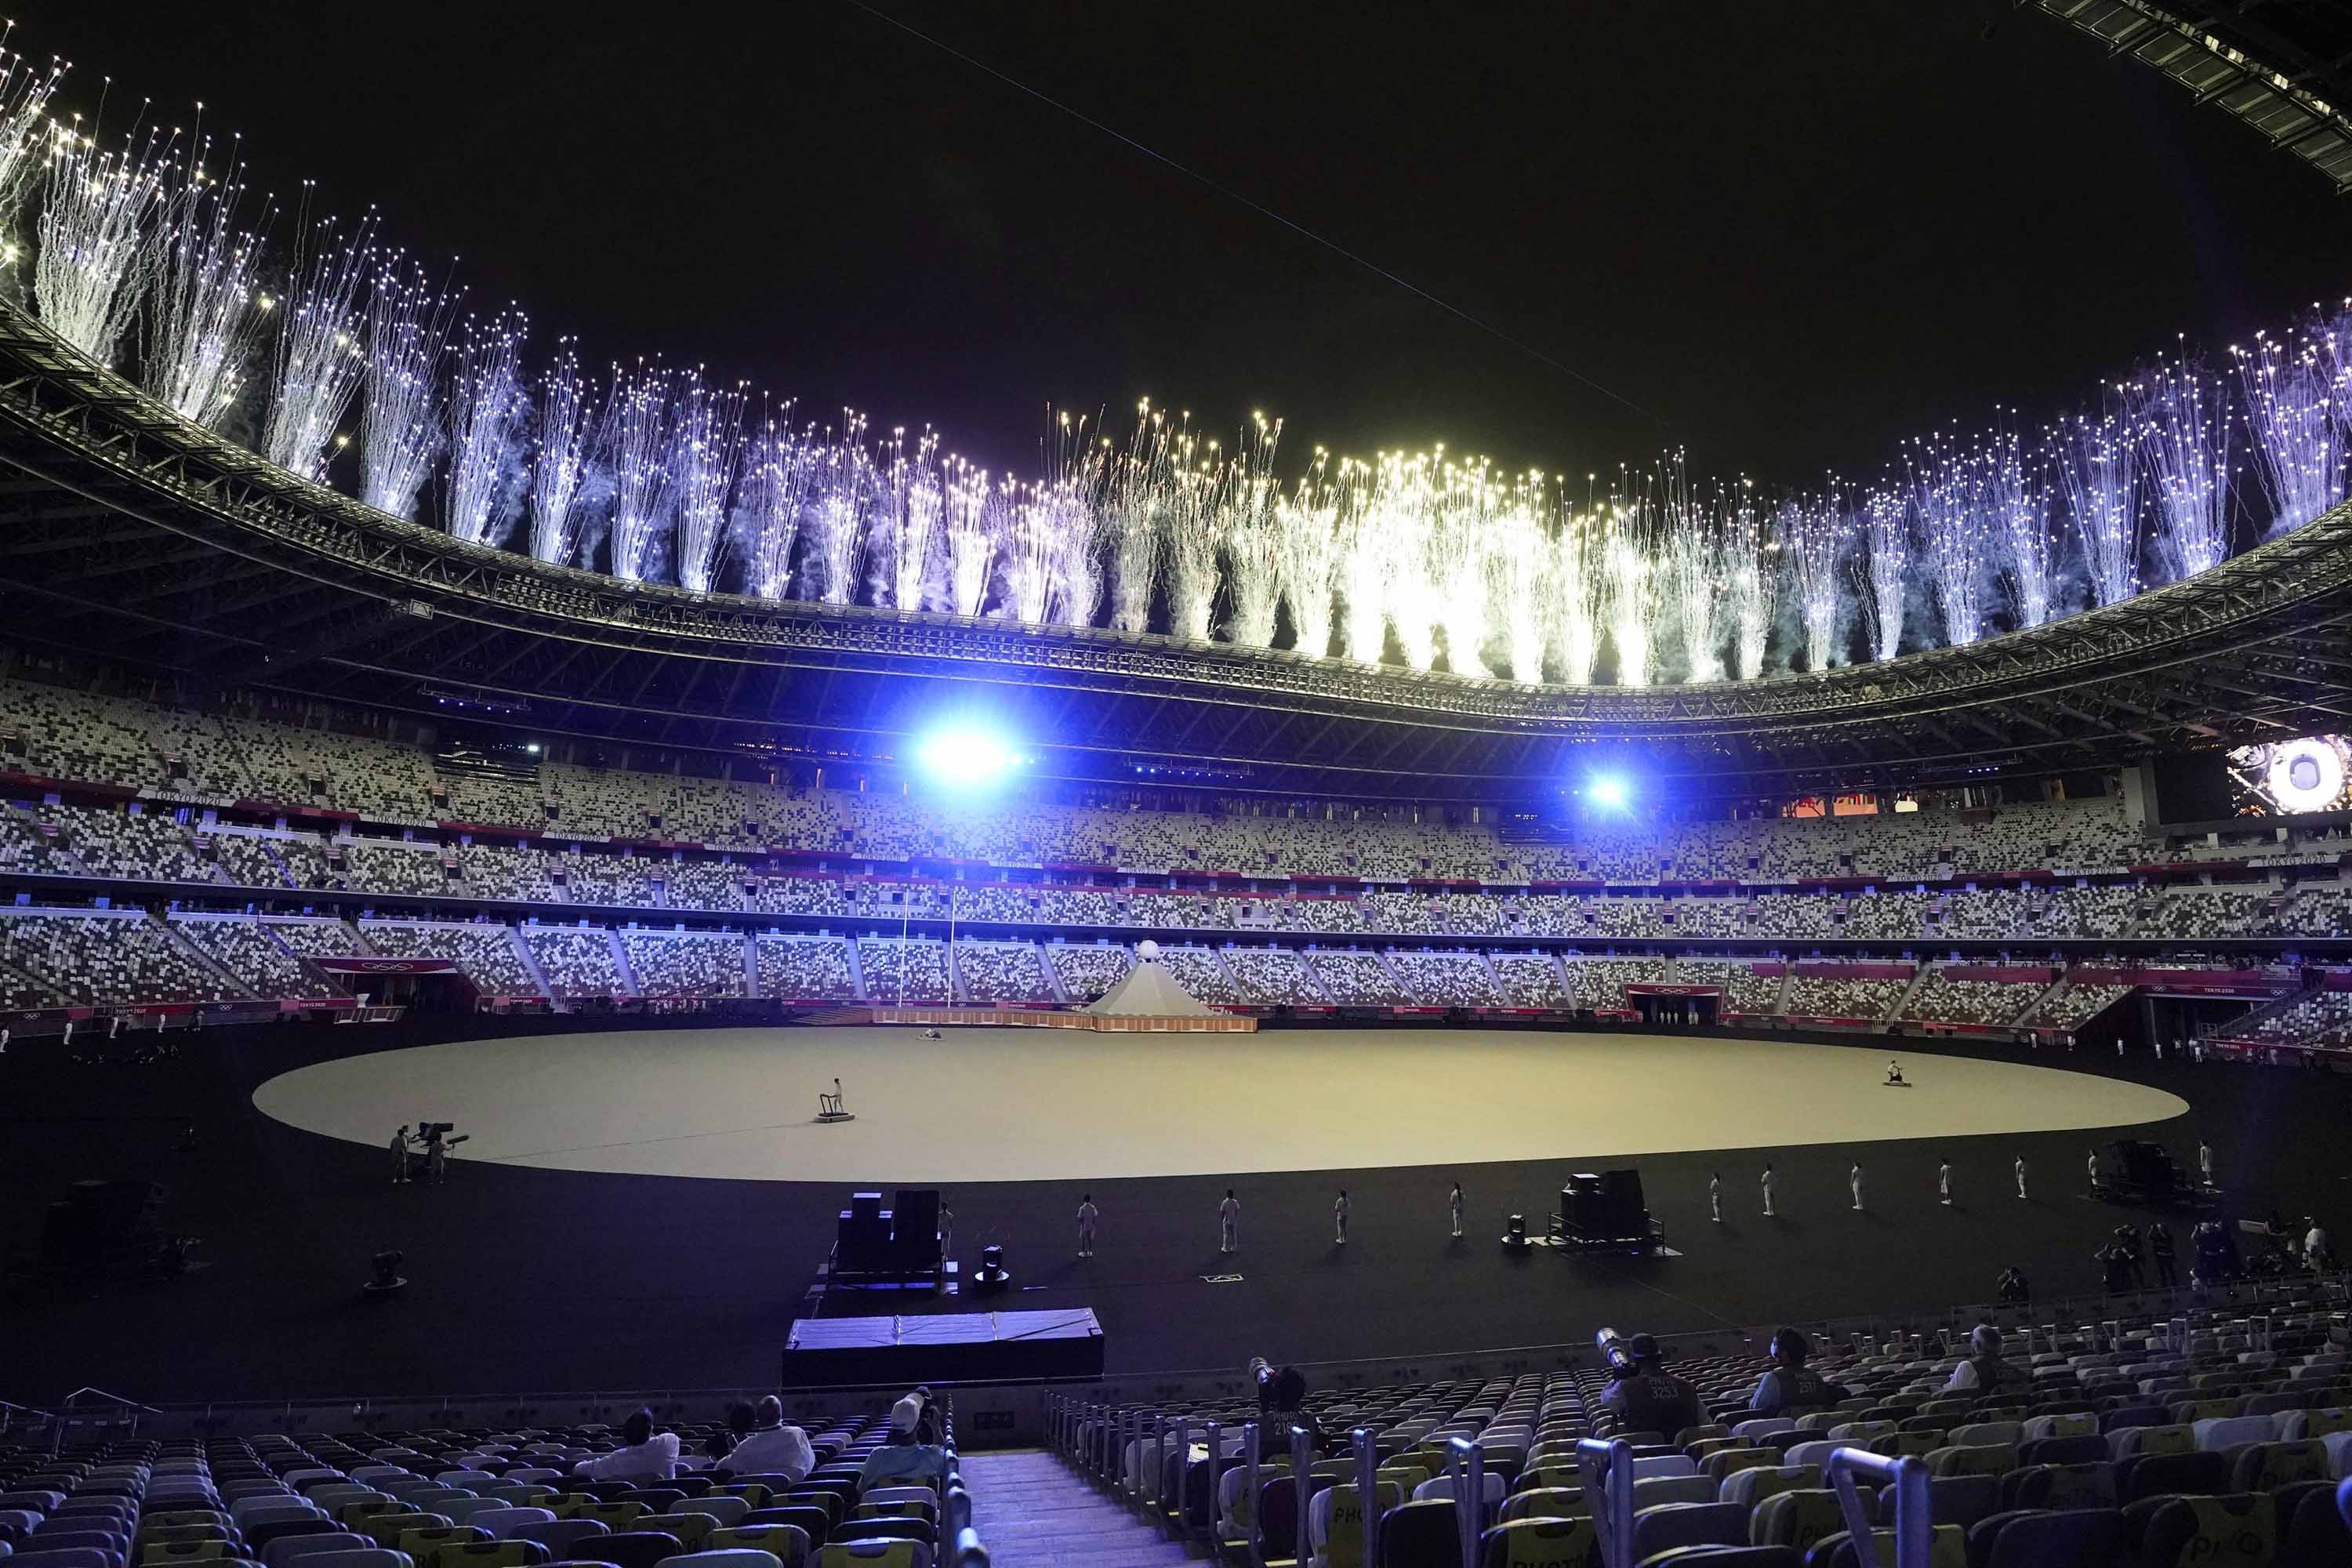 Fireworks go off above the sparsely filled Olympic Stadium during the opening ceremony.